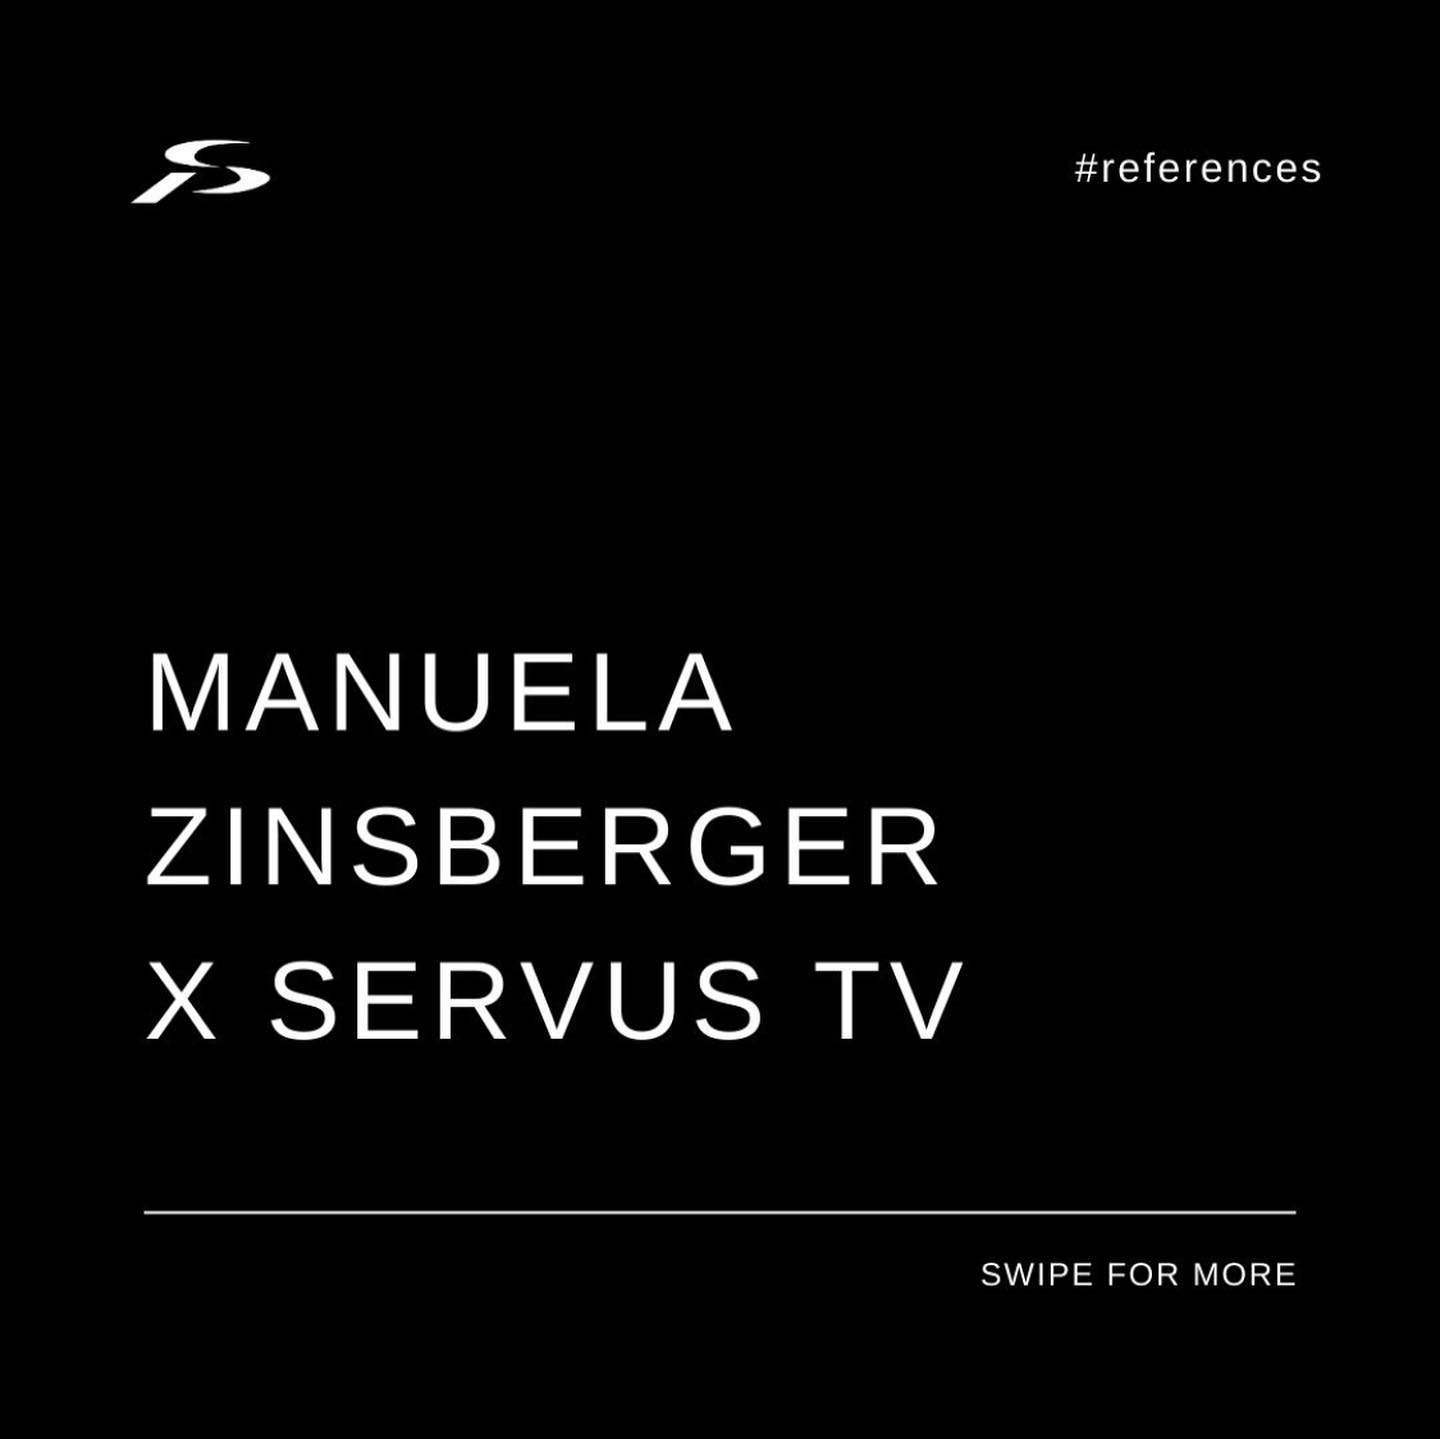 Exciting news from London! 🇬🇧

Our stunning athlete @manuela_zinsberger recently had the honour of hosting @servustv as part of the #championsleague match between #Arsenal London and #Bayern Munich. 
Manuela shared fascinating insights into the Ars